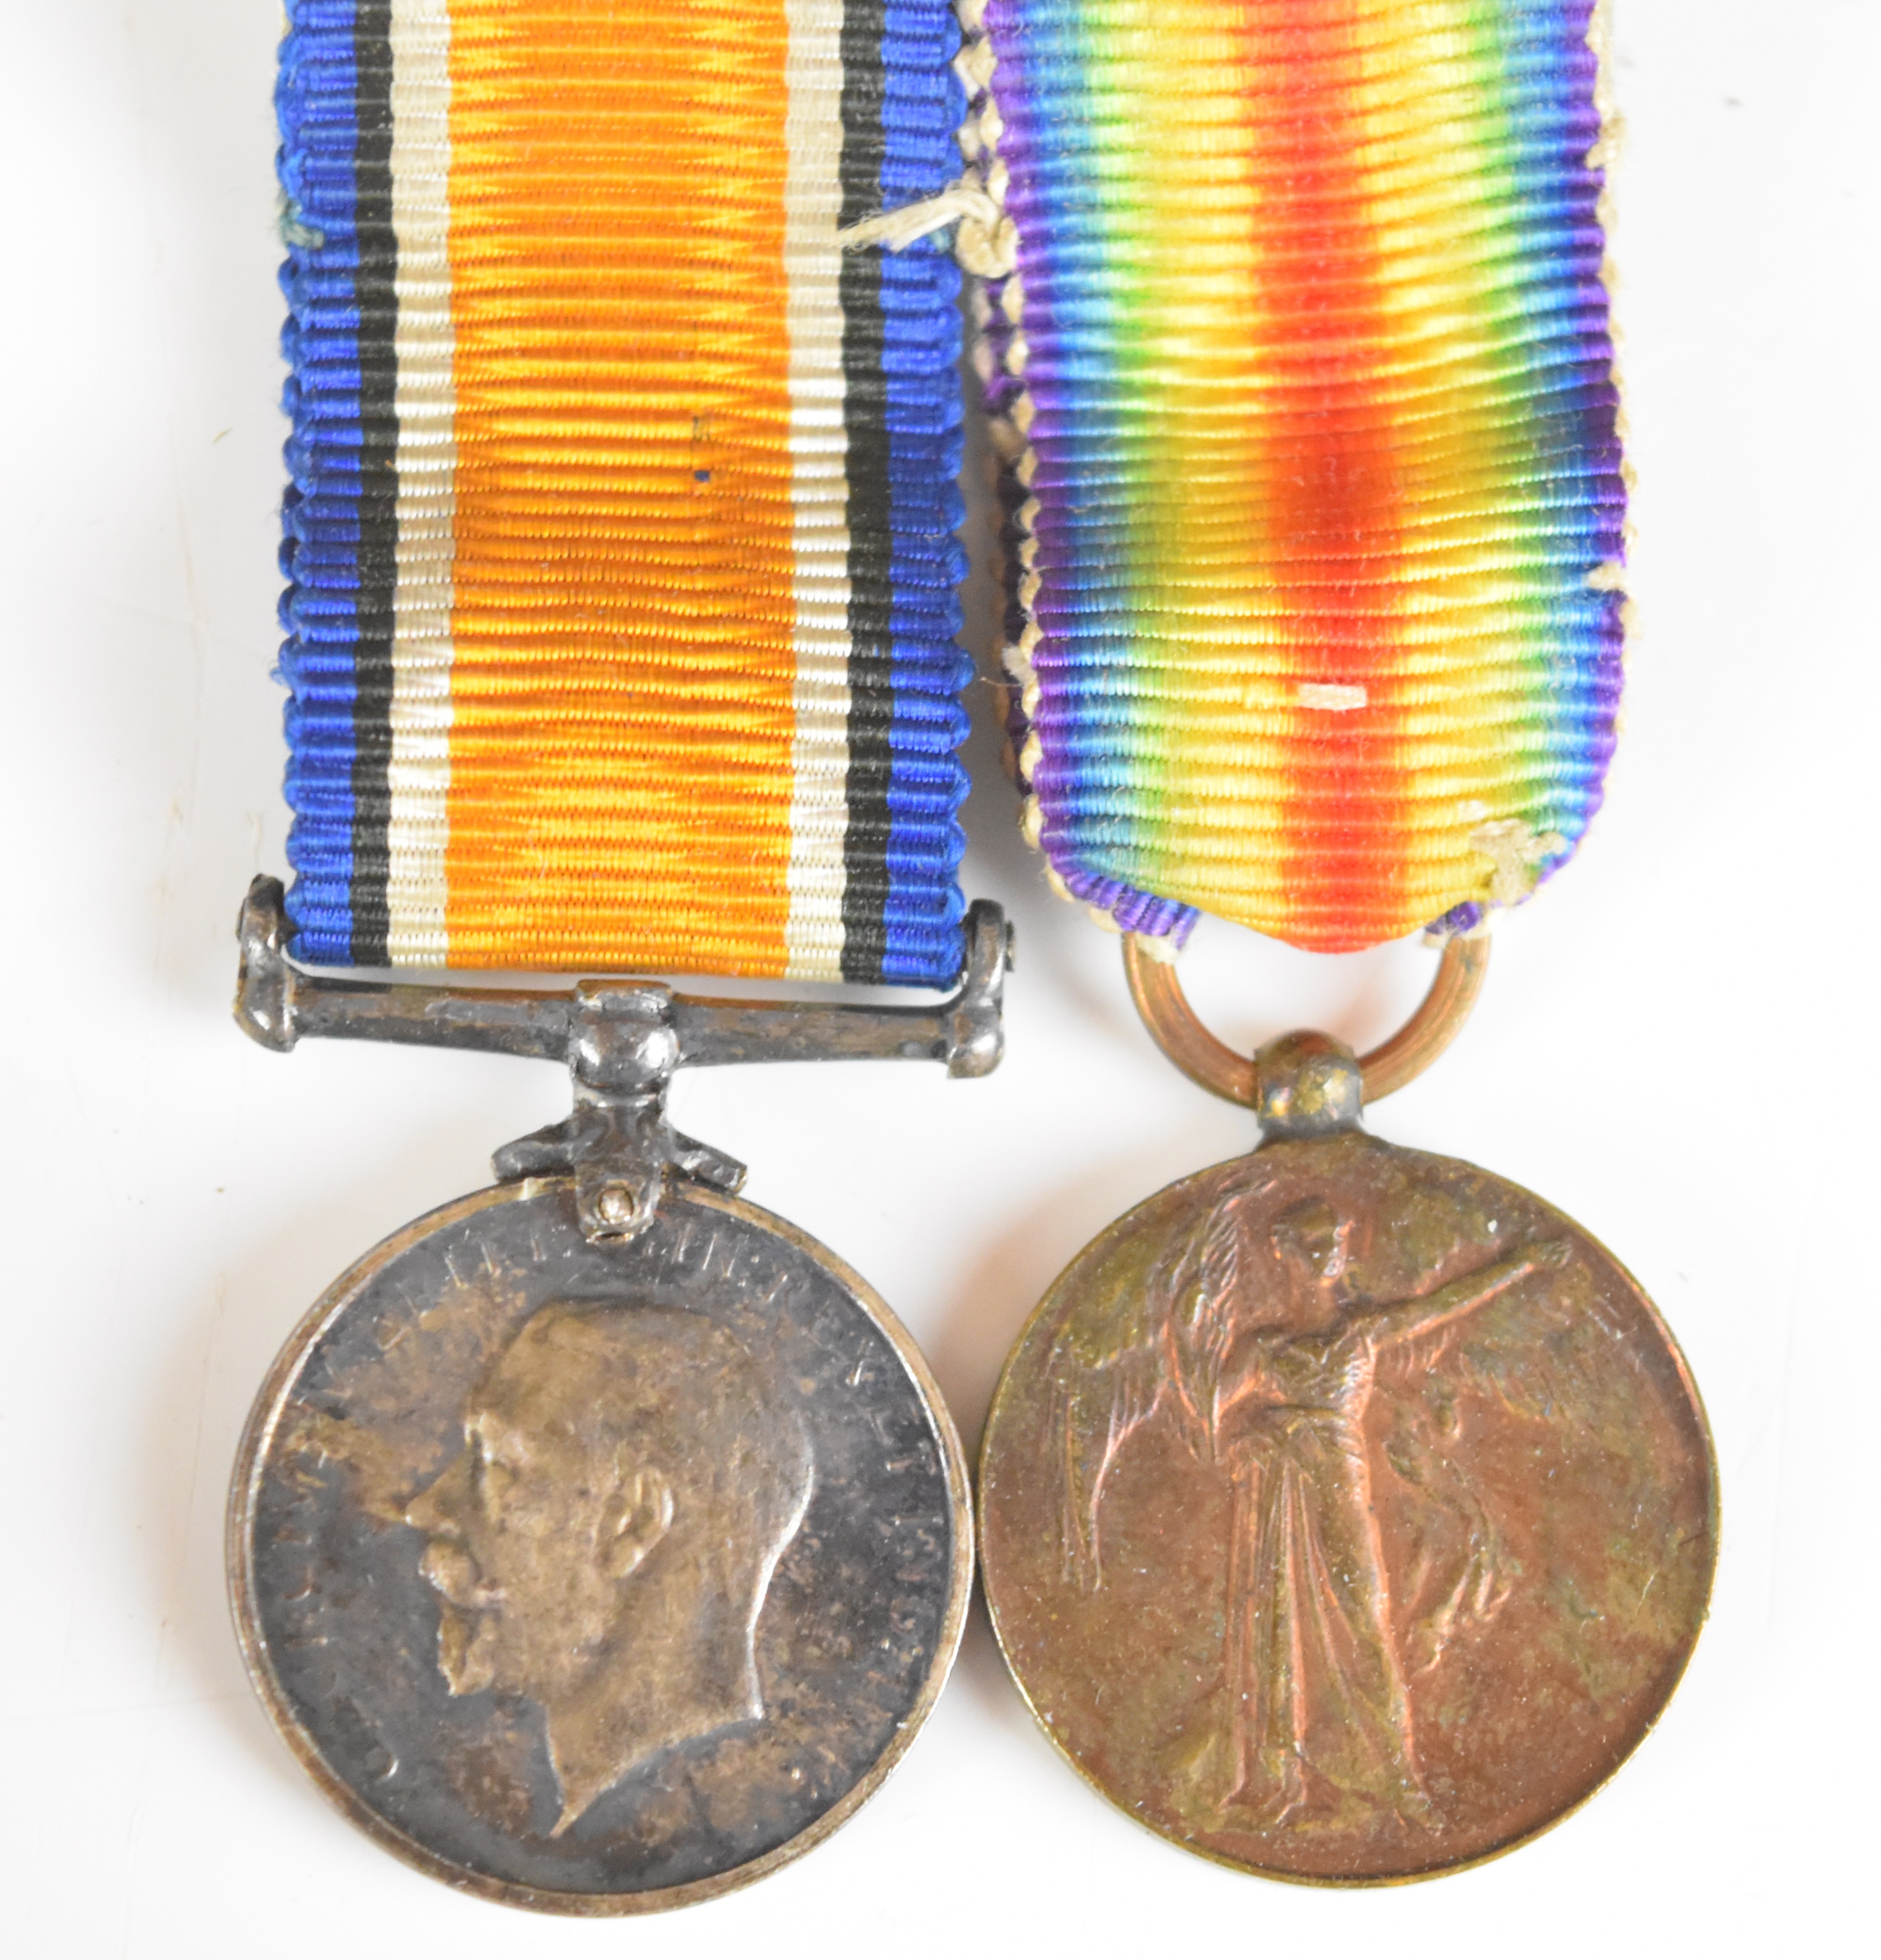 British Army WW1 11th Hussars medal trio comprising 1914 'Mons' Star with clasp for 5th August to - Image 5 of 13